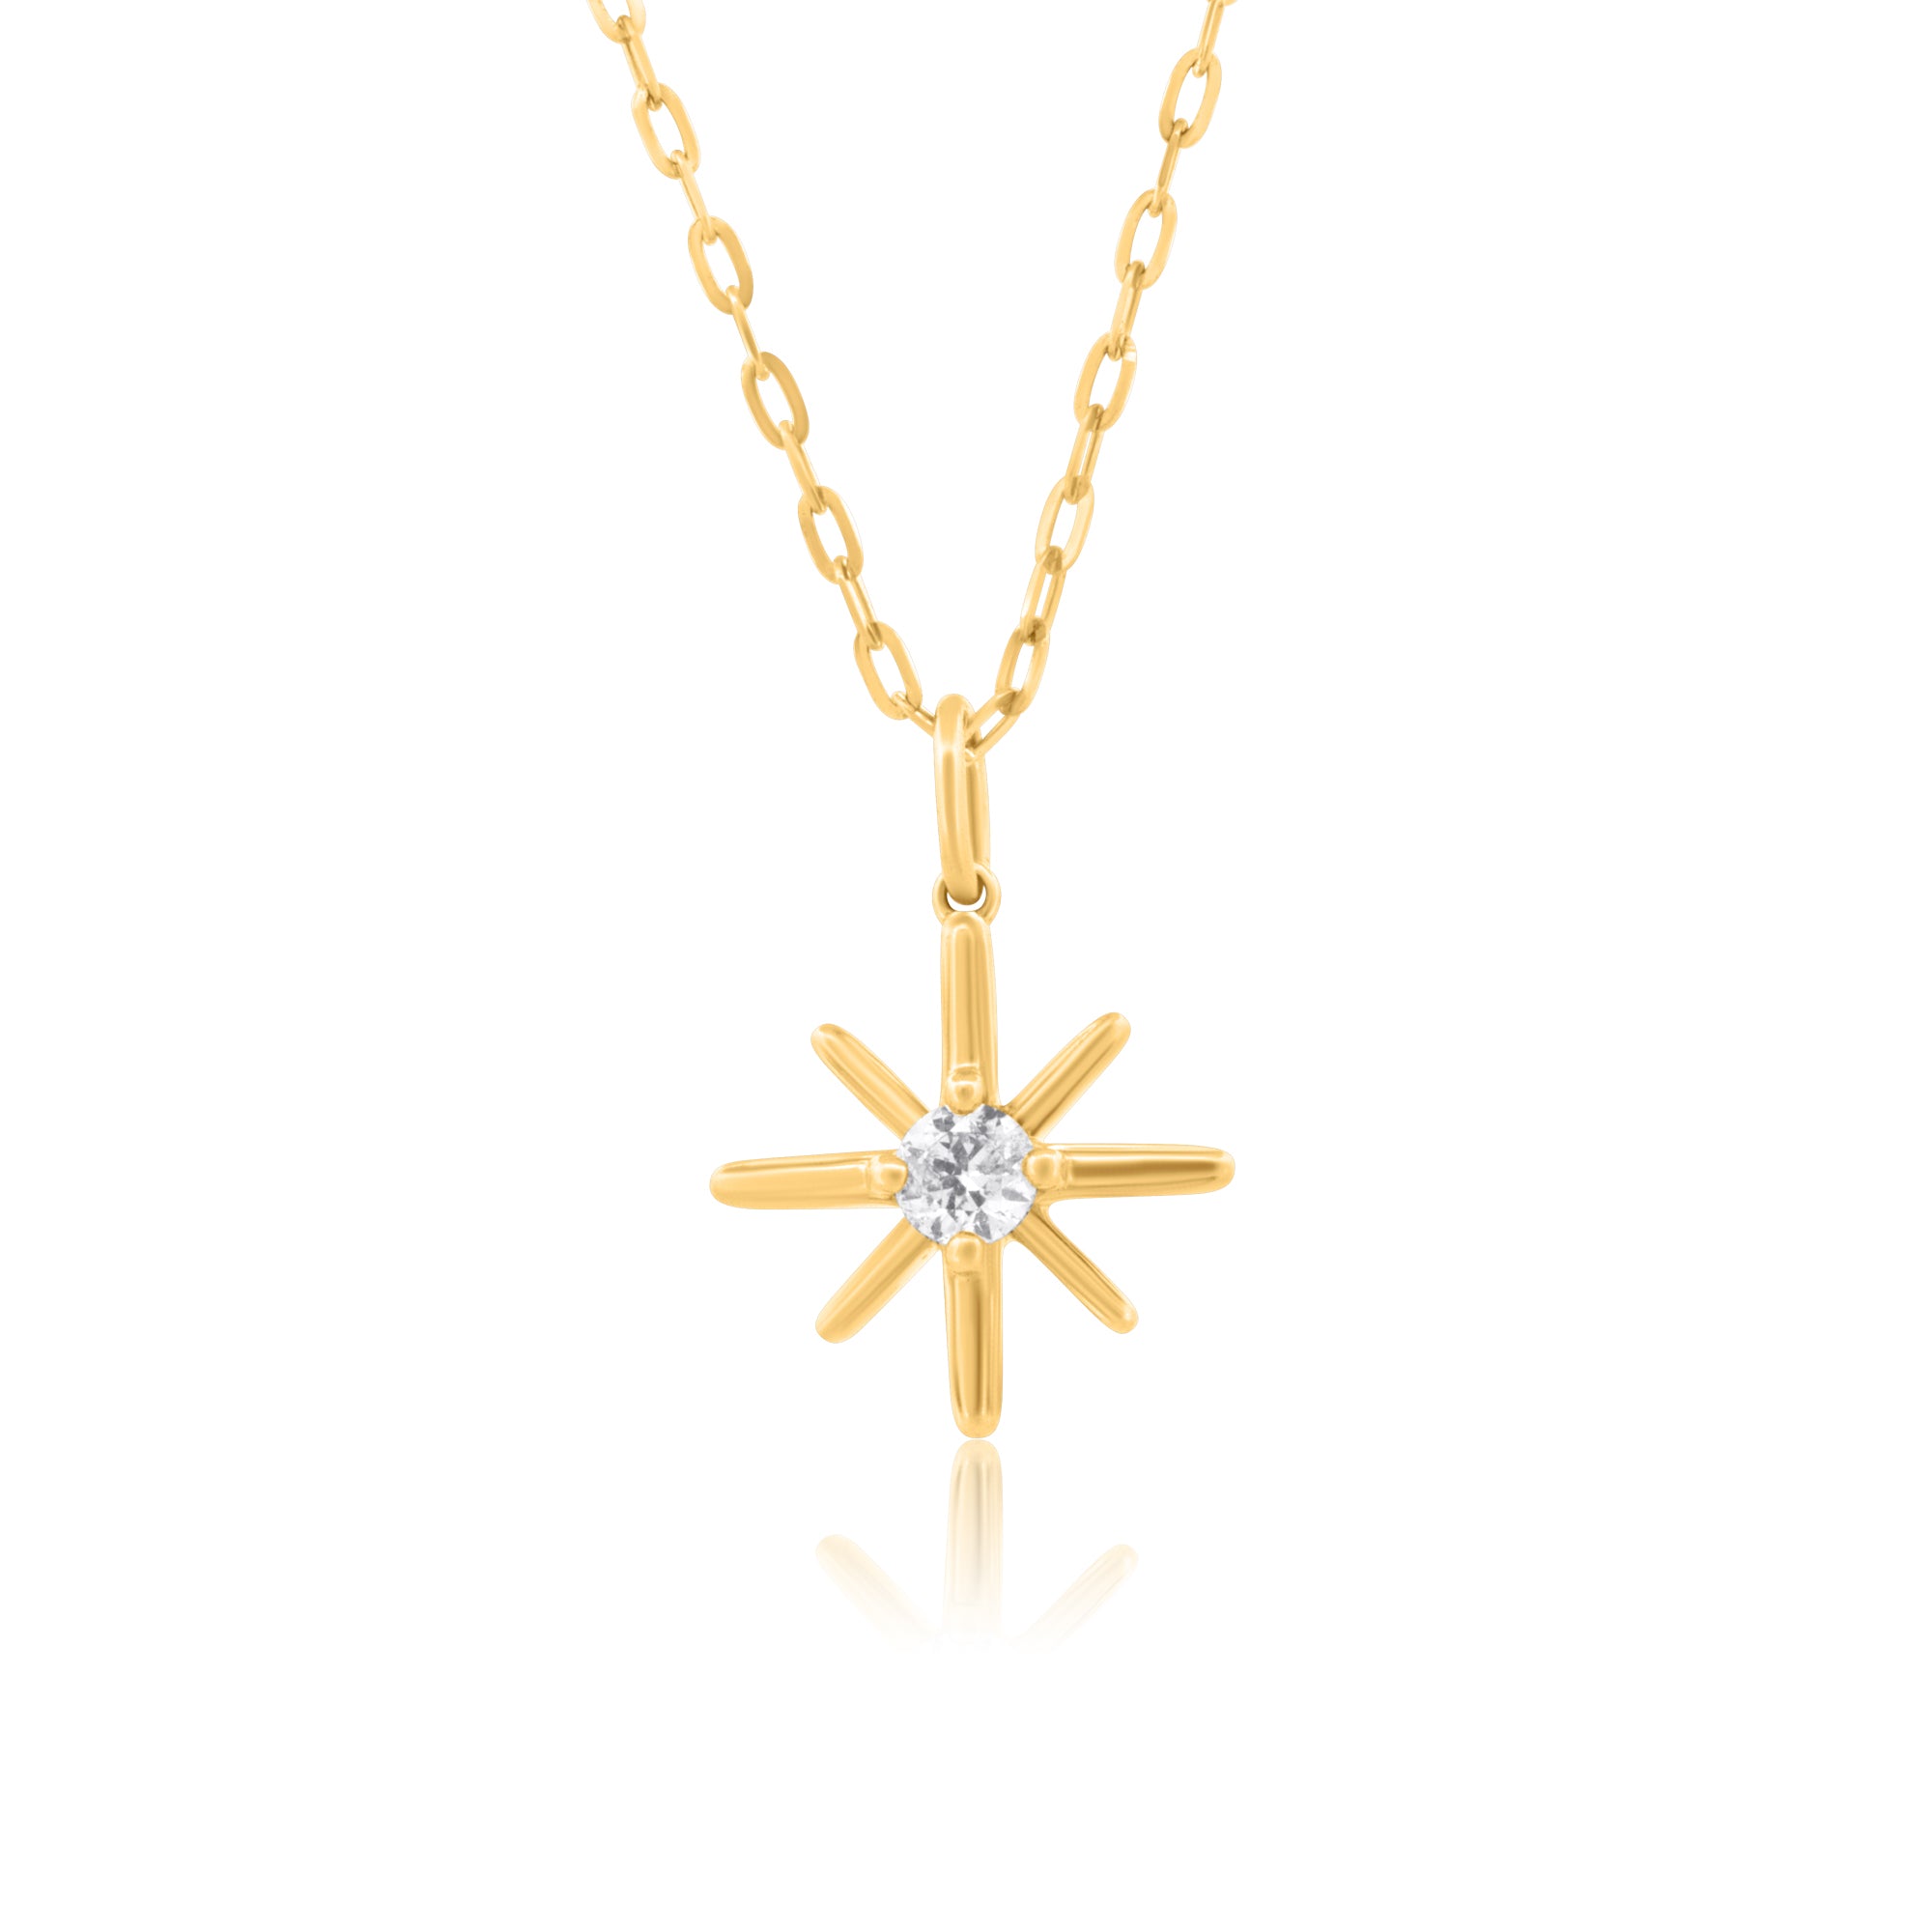 10k Yellow Gold with 0.25Ctw White Diamond North Star Necklace